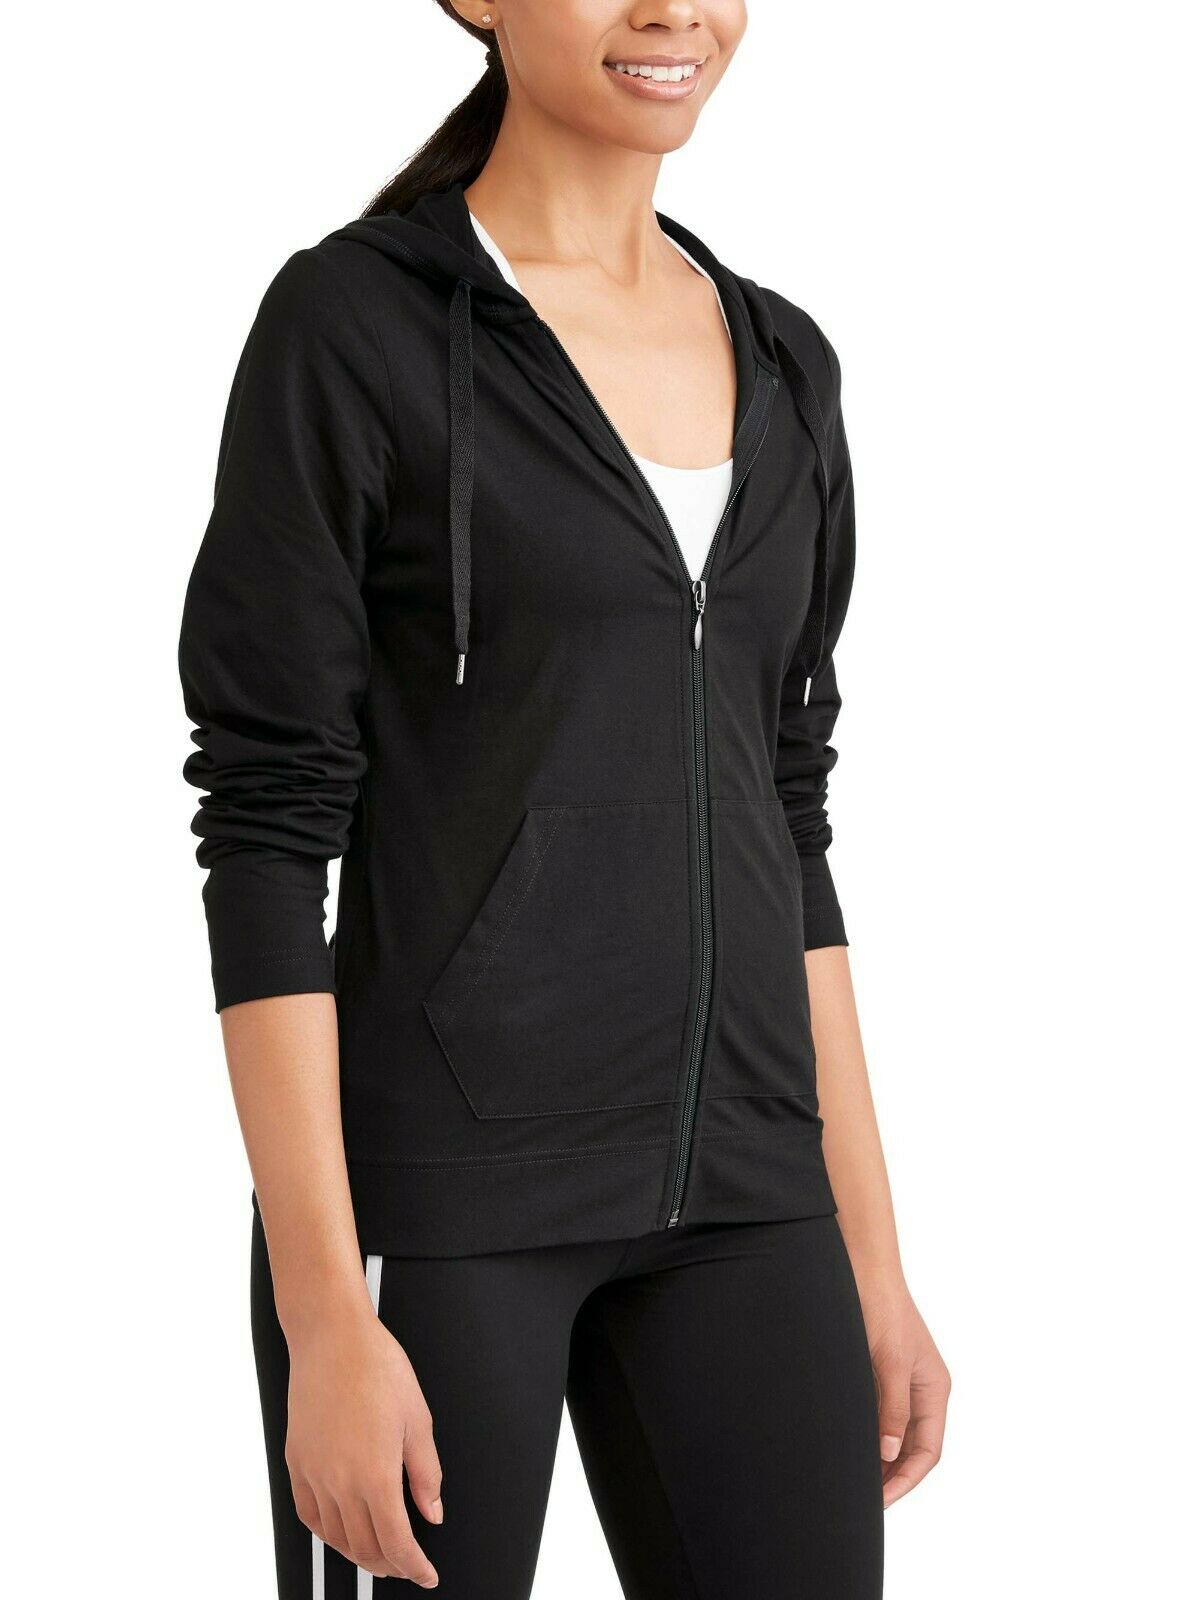 Athletic Works Women's French Terry Core Active Full Zip Hoodie Black L XL 2X